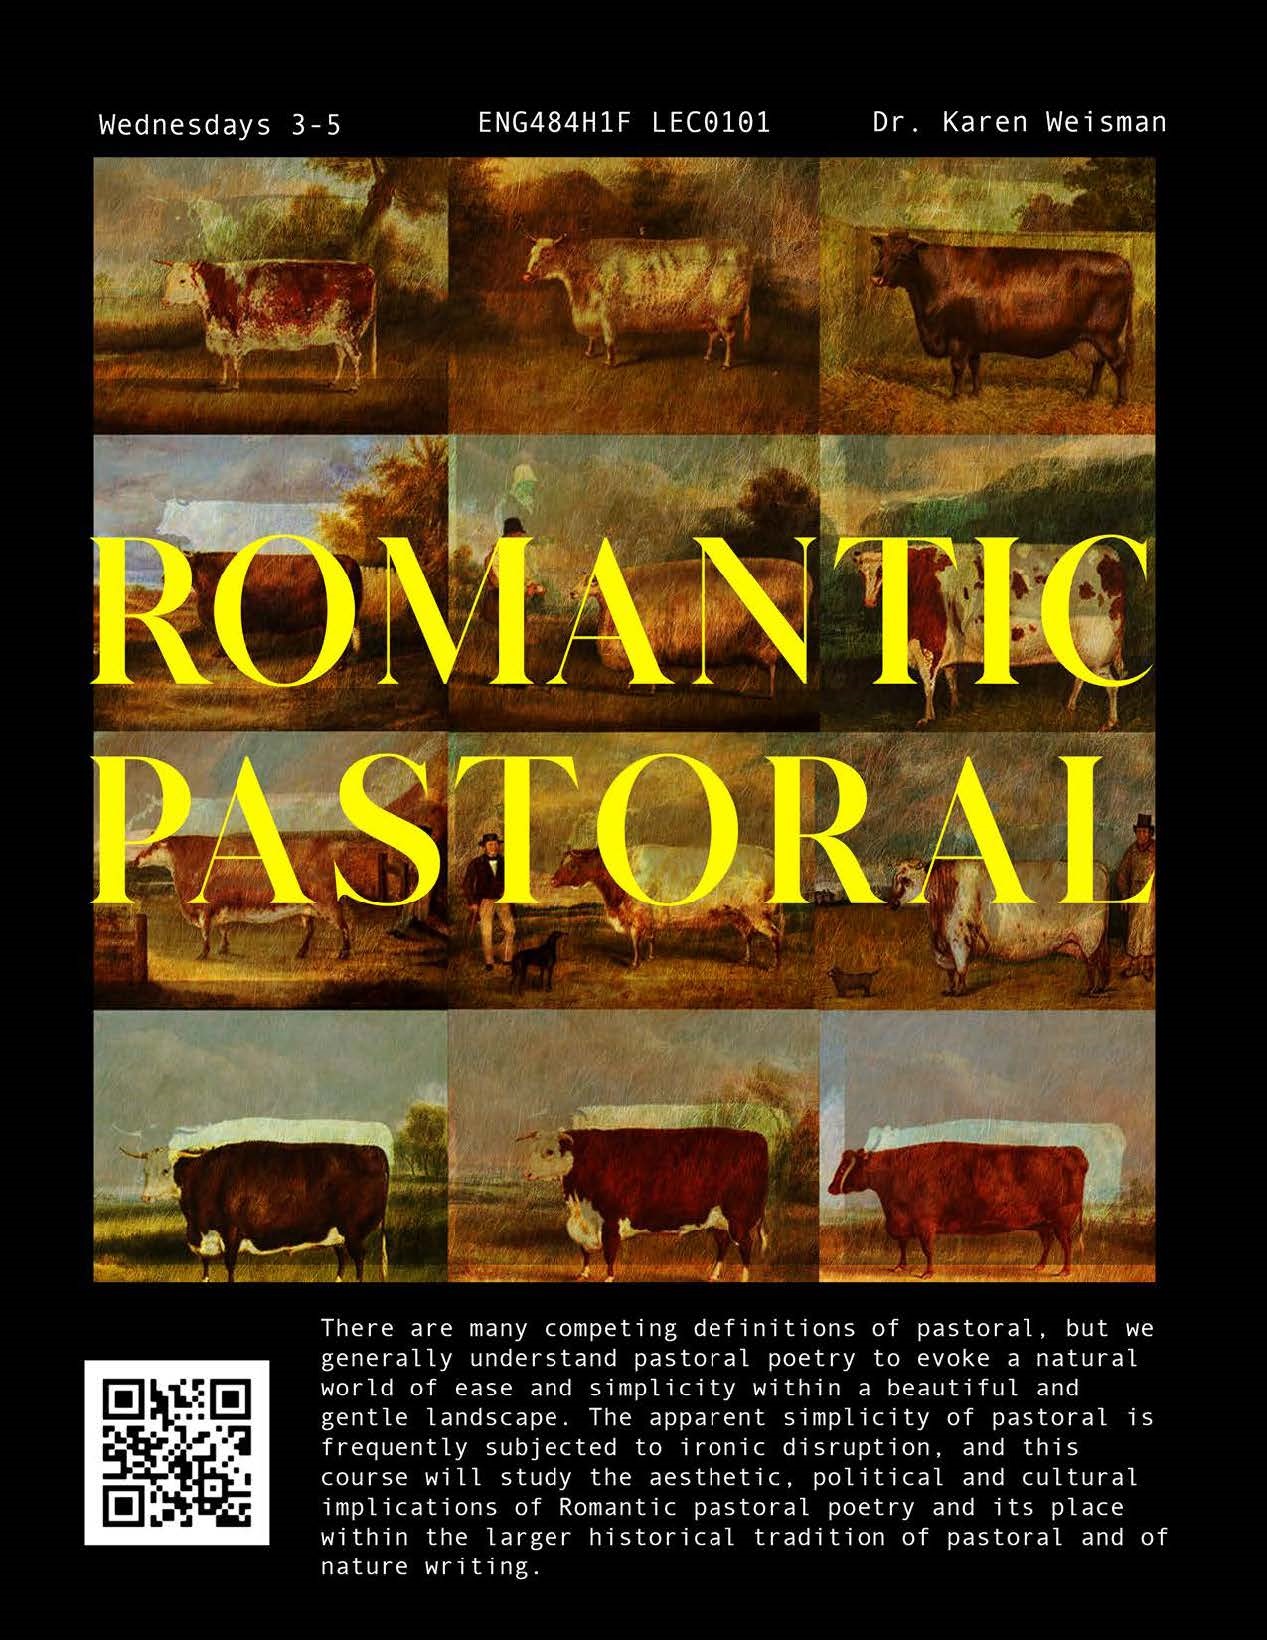 One of Andrew Chang’s favourite posters is for “Romantic Pastoral ”— a course taught by Professor Karen Weisman.